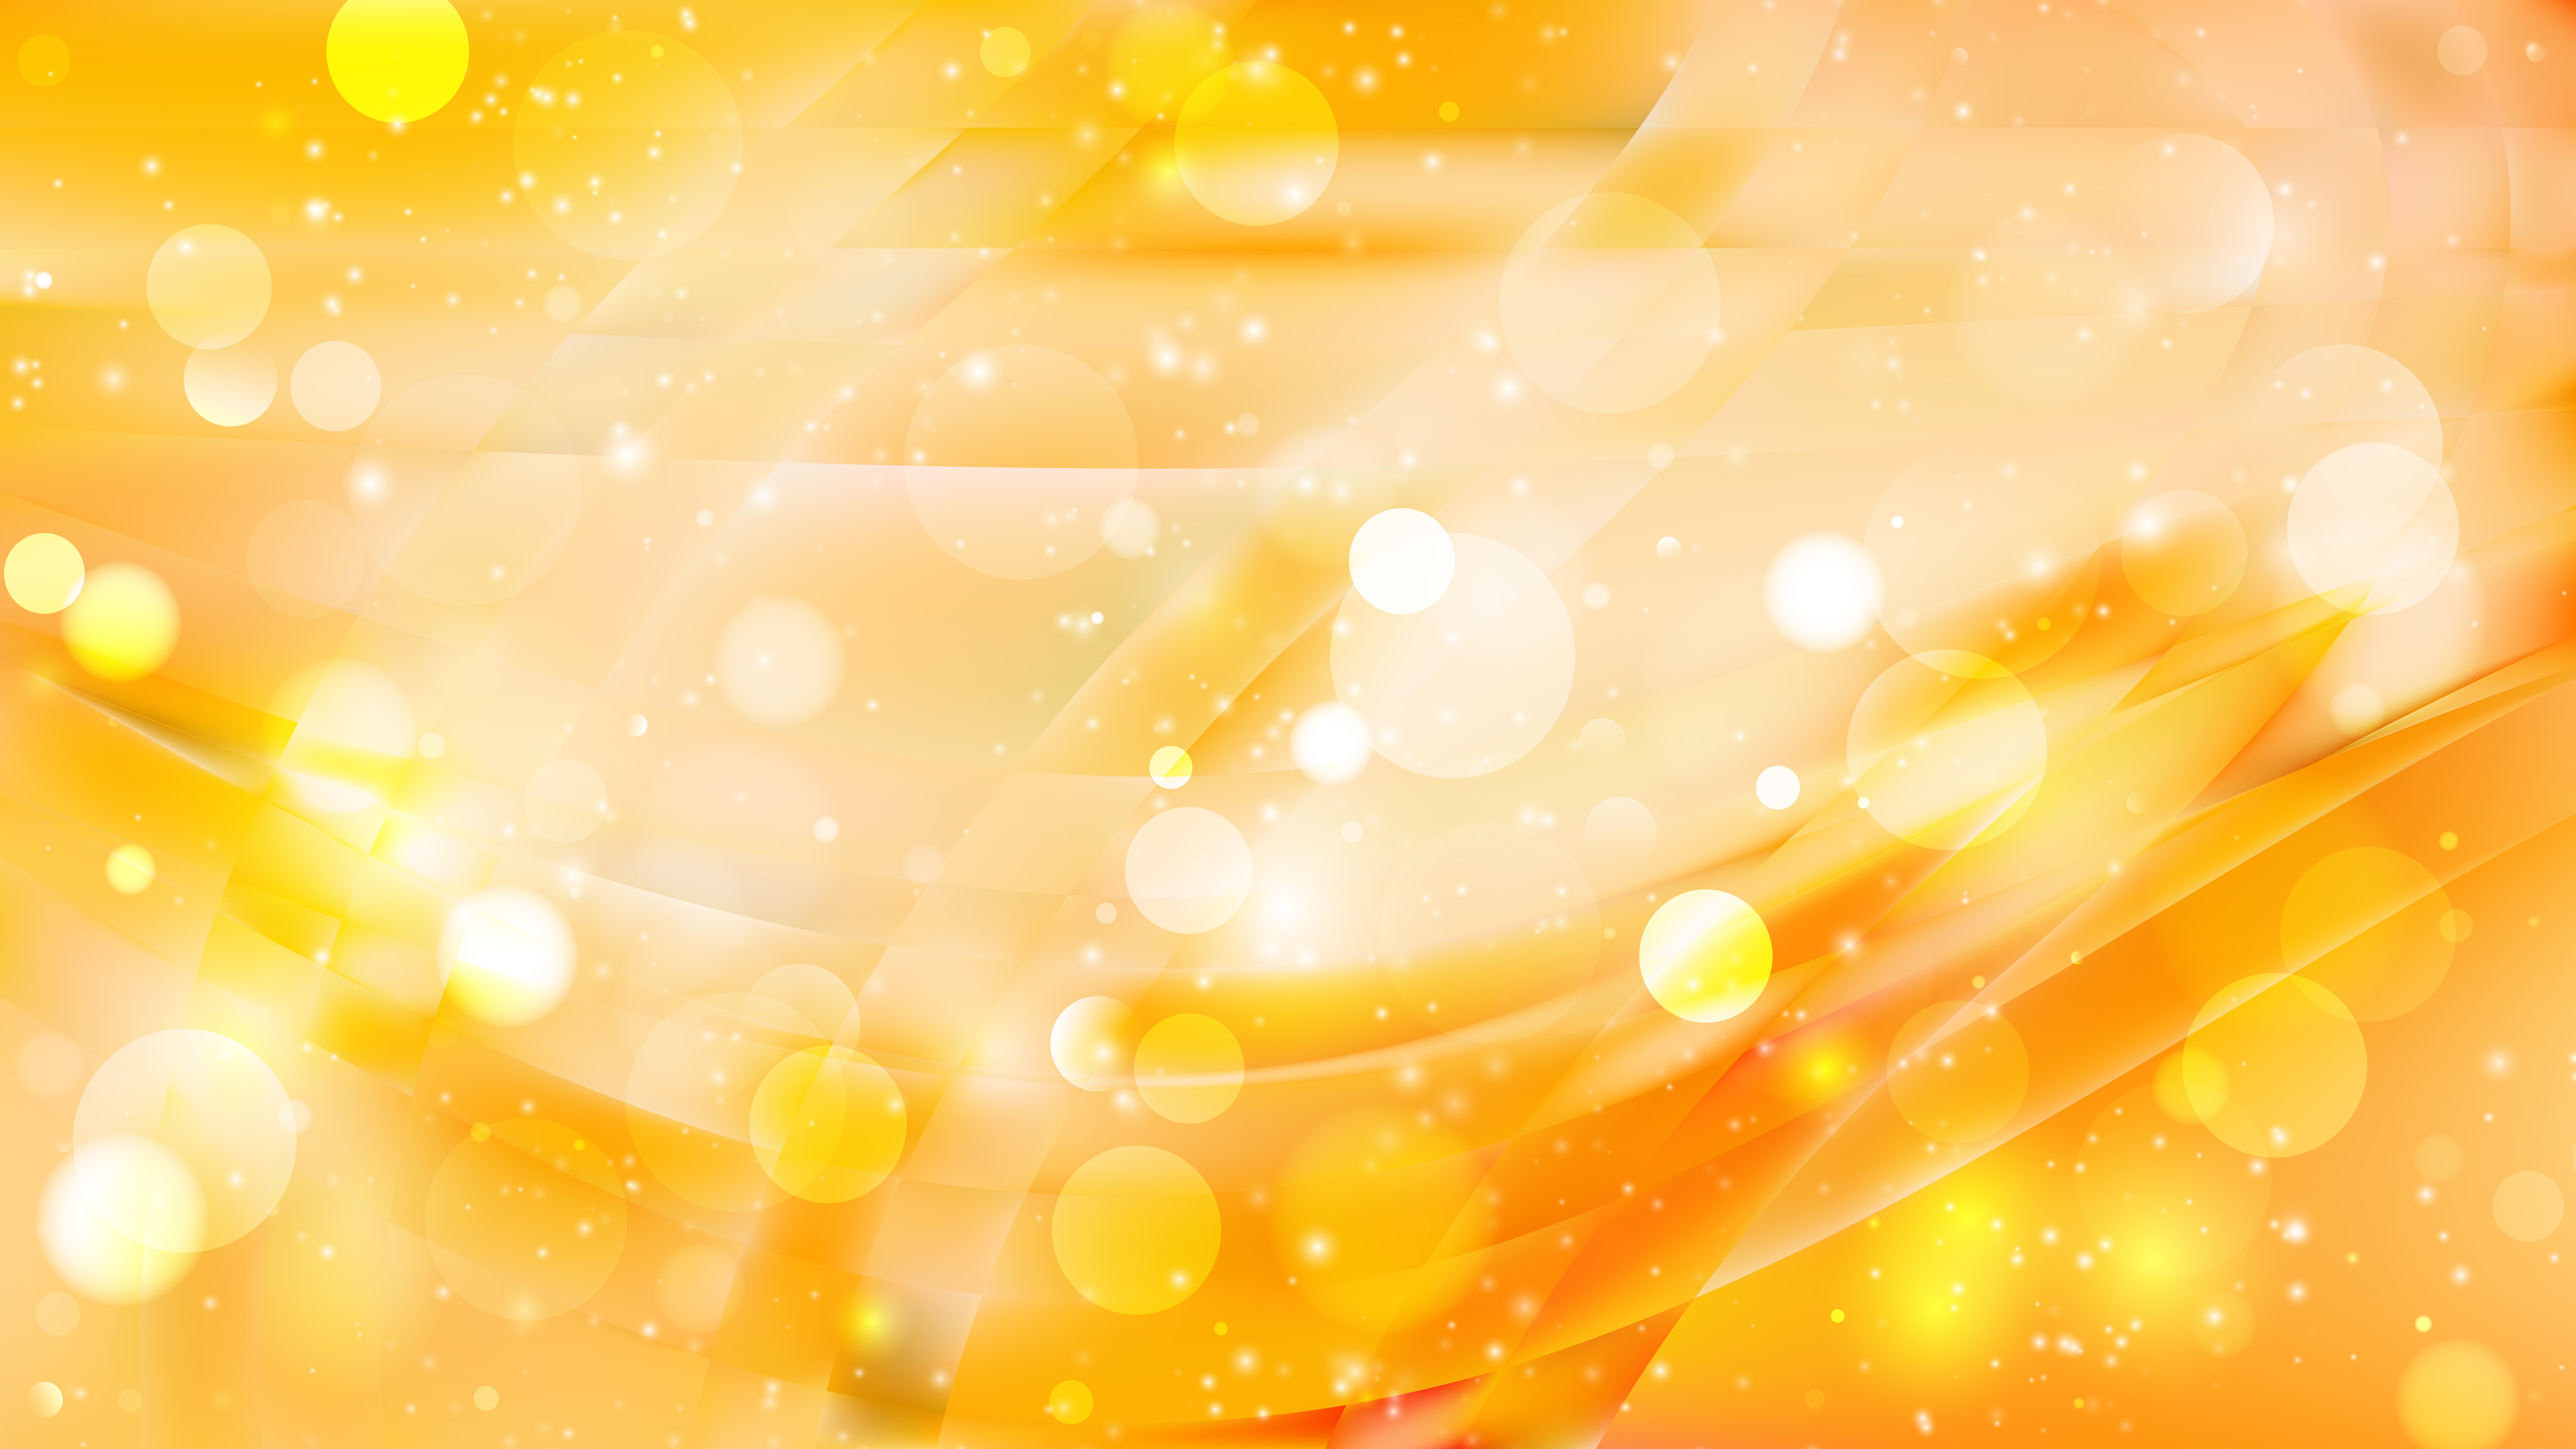 Free Abstract Orange and Yellow Bokeh Lights Background Image